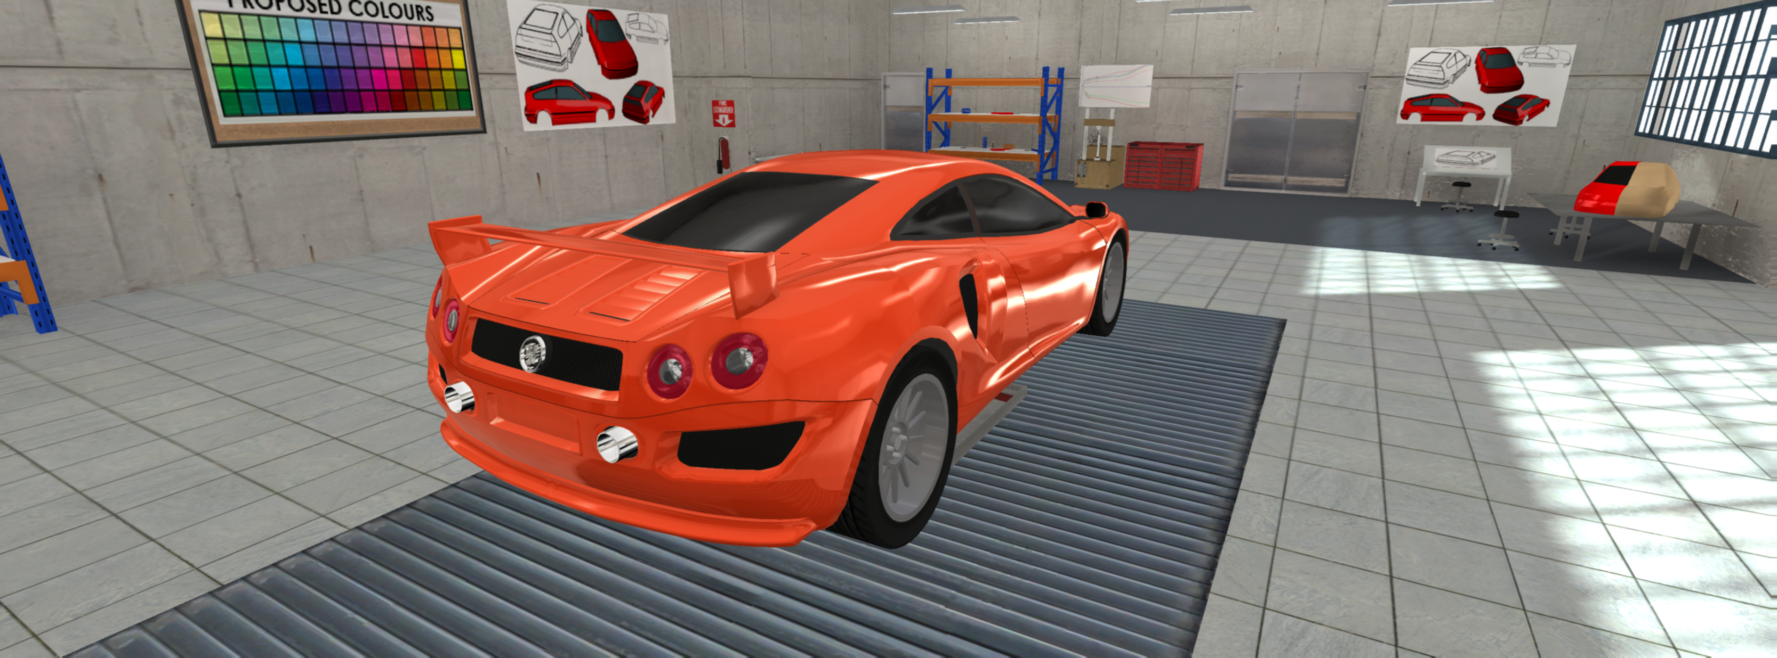 More car bodies! image - Automation: The Car Company Tycoon Game - Mod DB